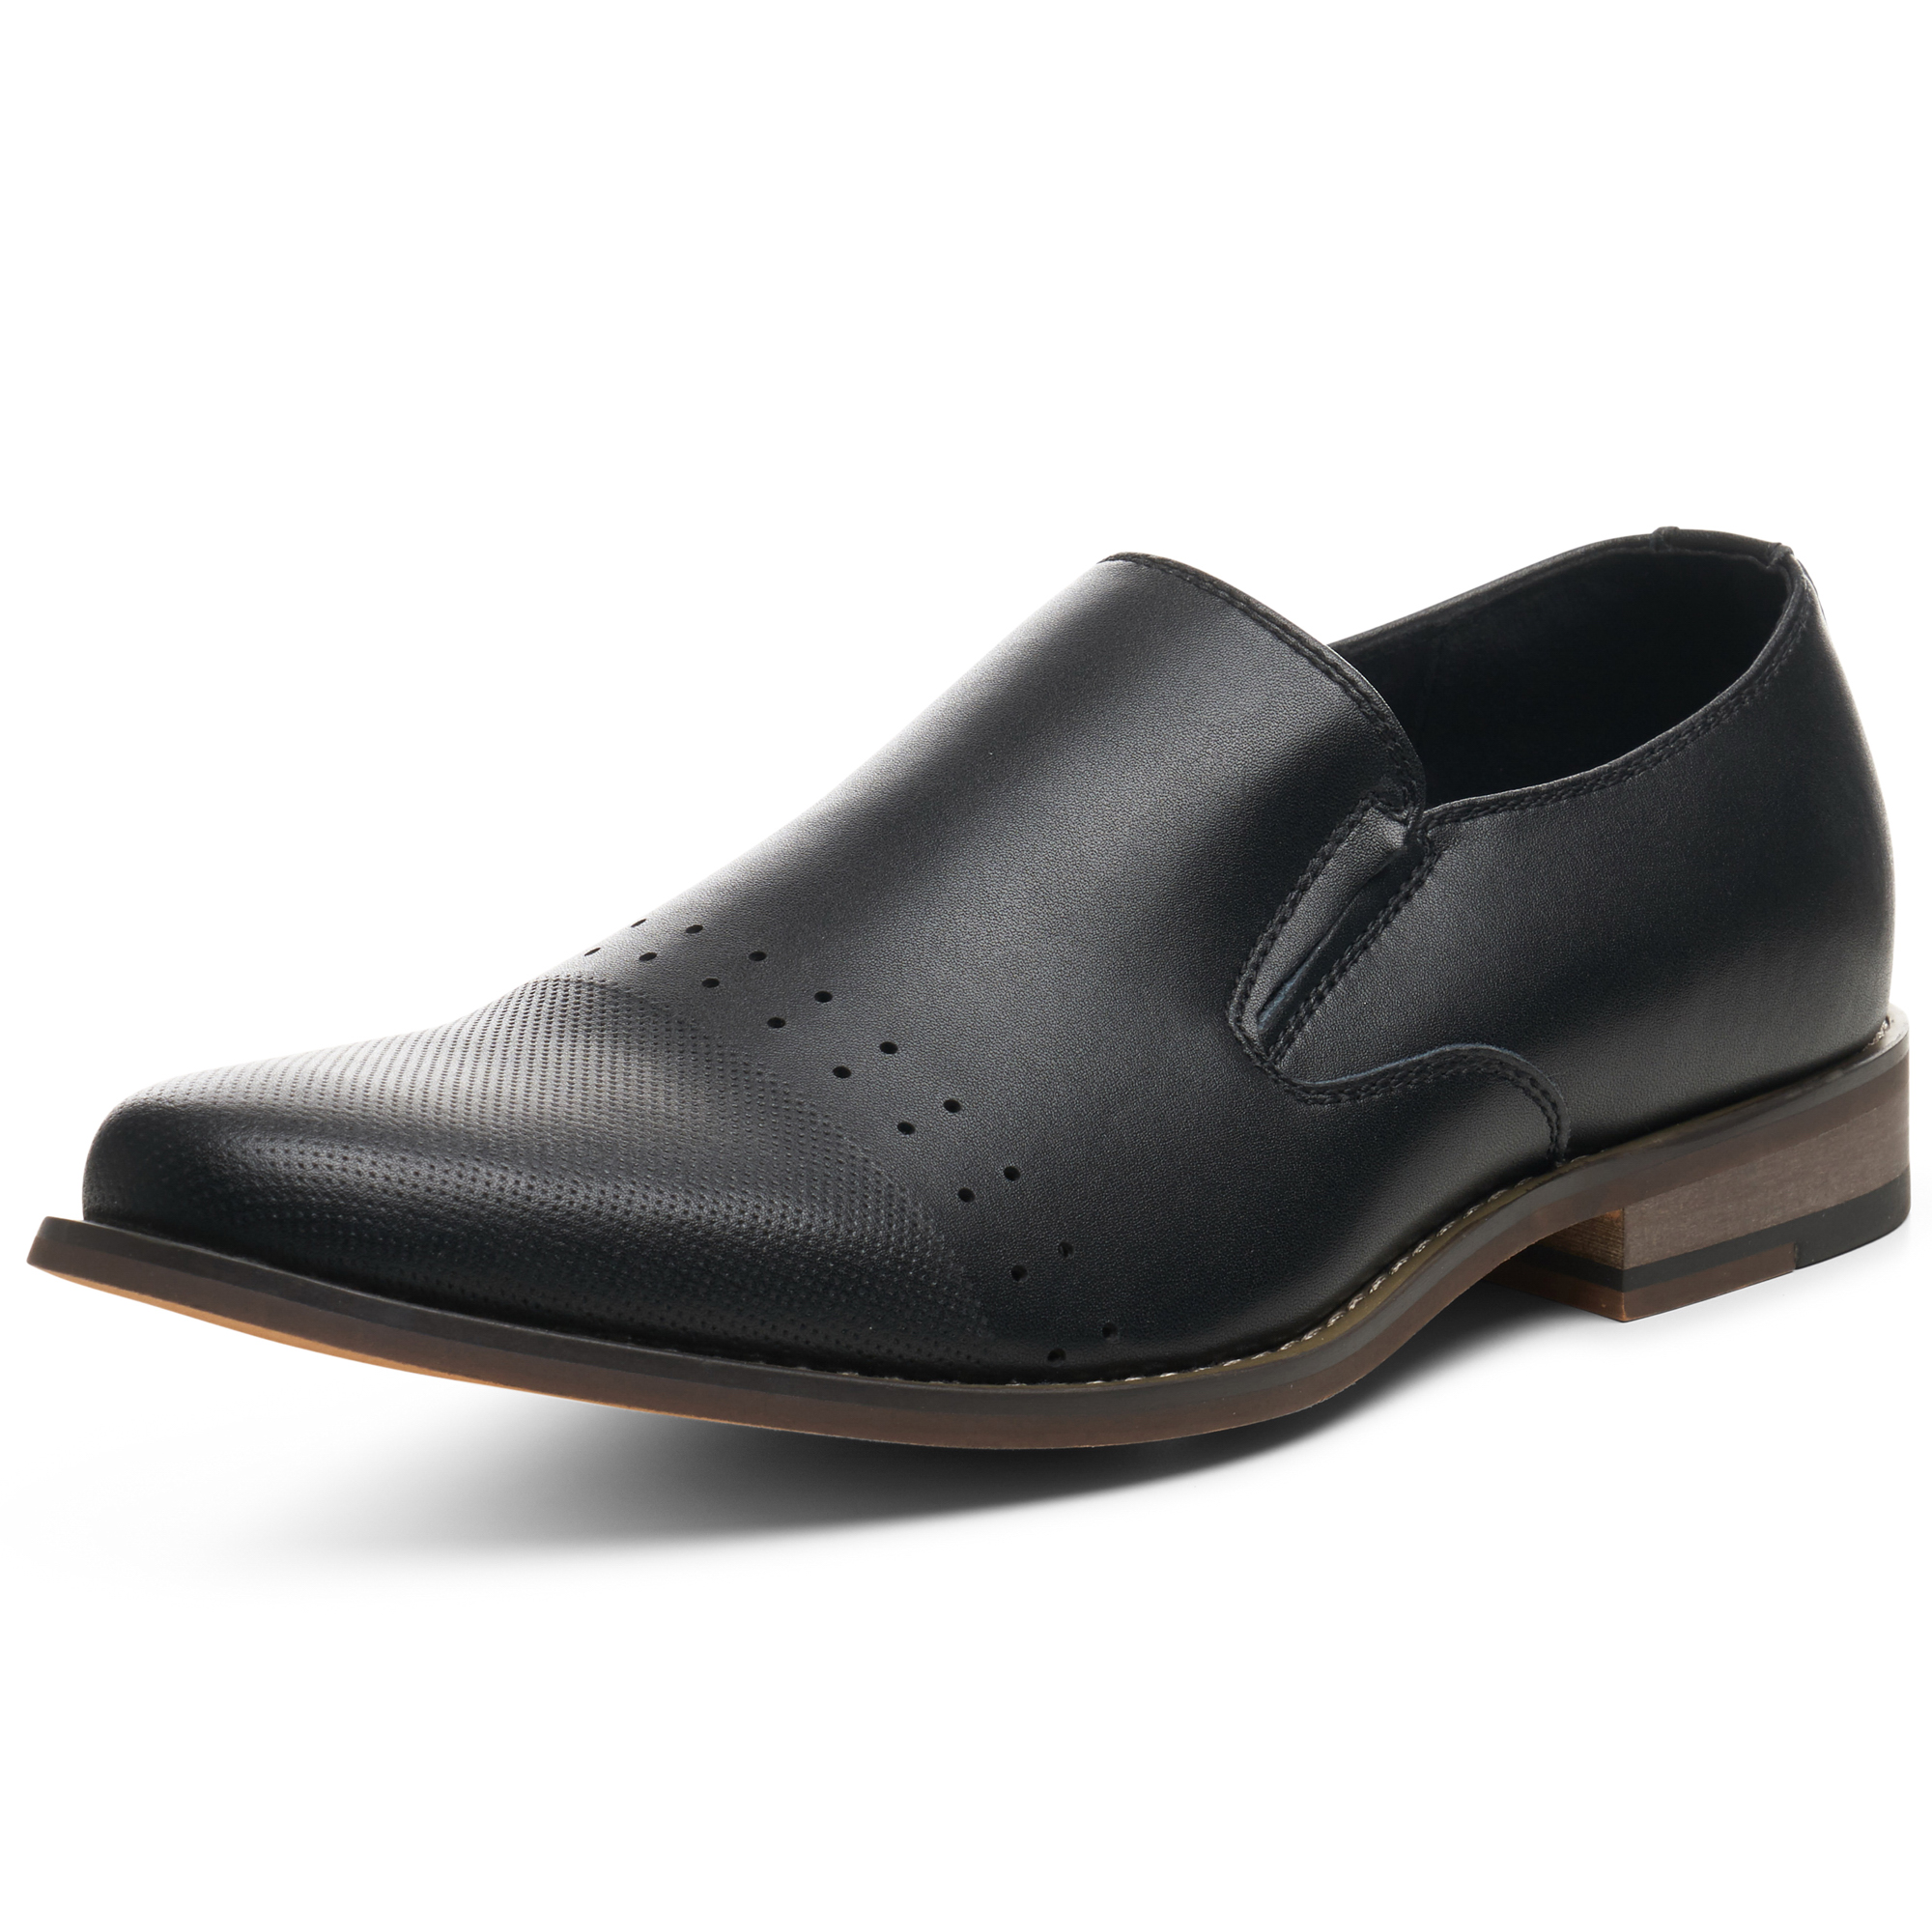 Alpine Swiss Double Diamond Mens Leather Loafers Oxford Slip-on Dress Shoes - image 1 of 7